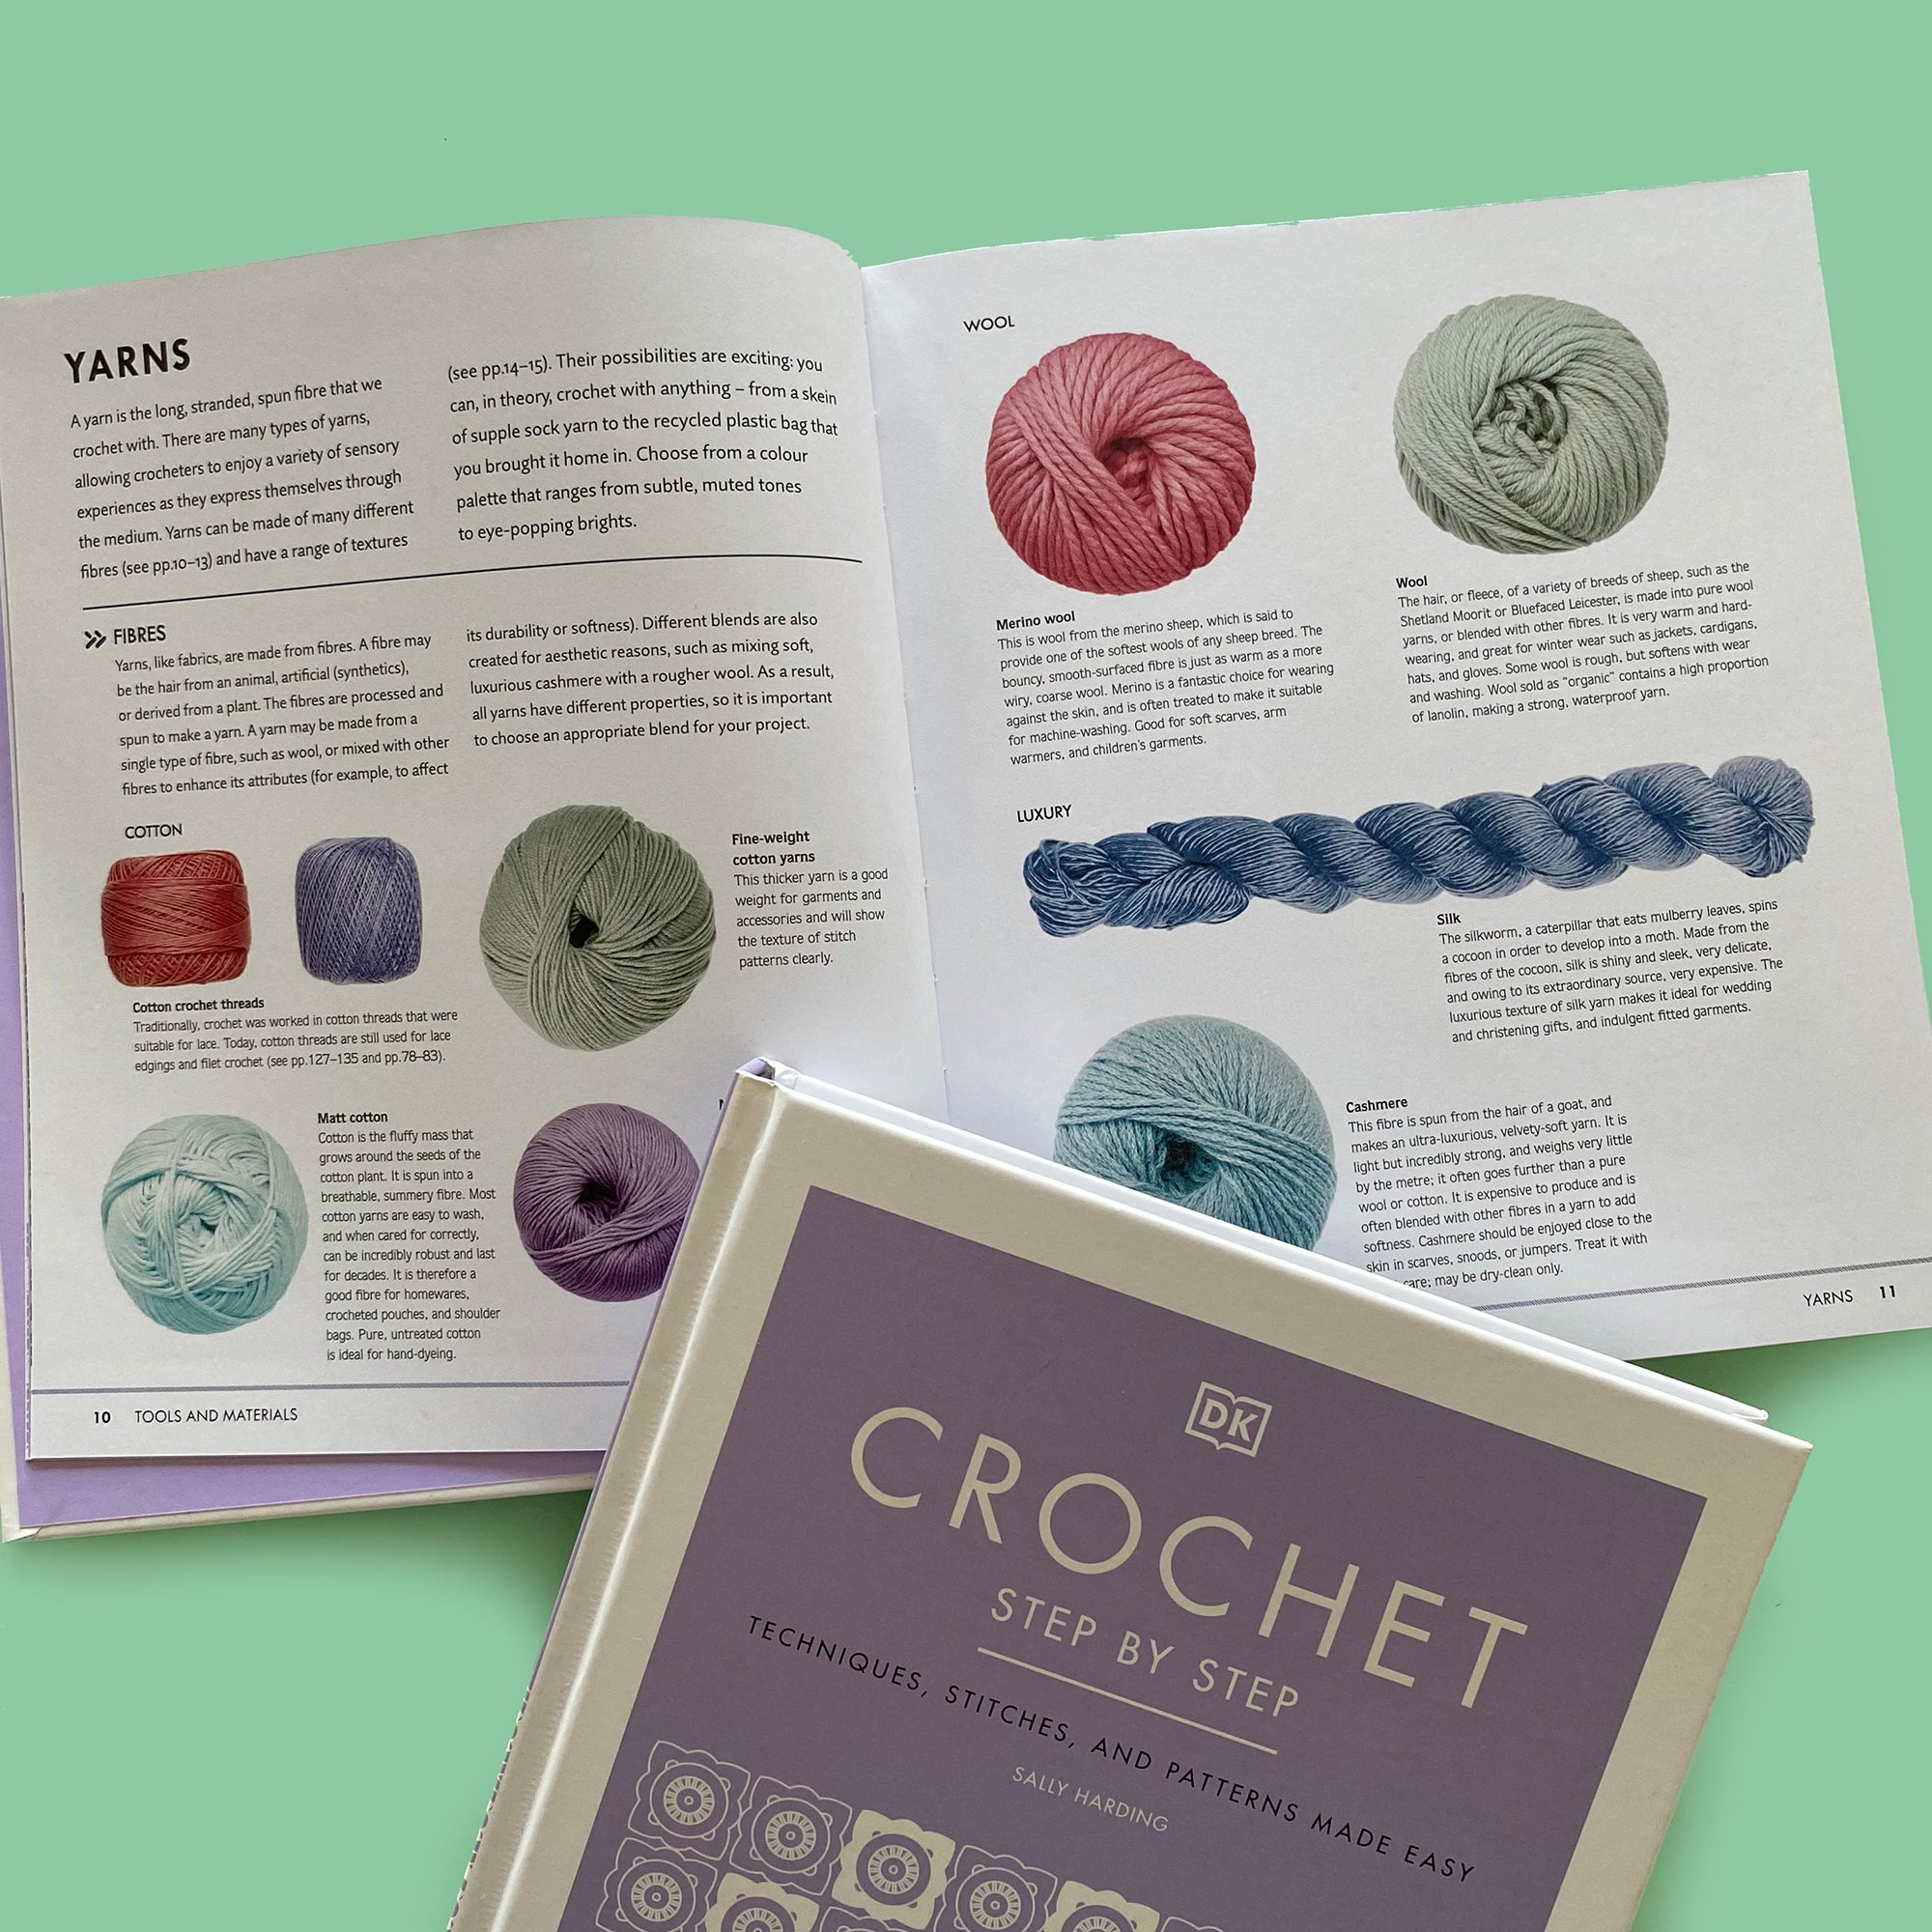 Crochet Step-by-Step - 5% OFF